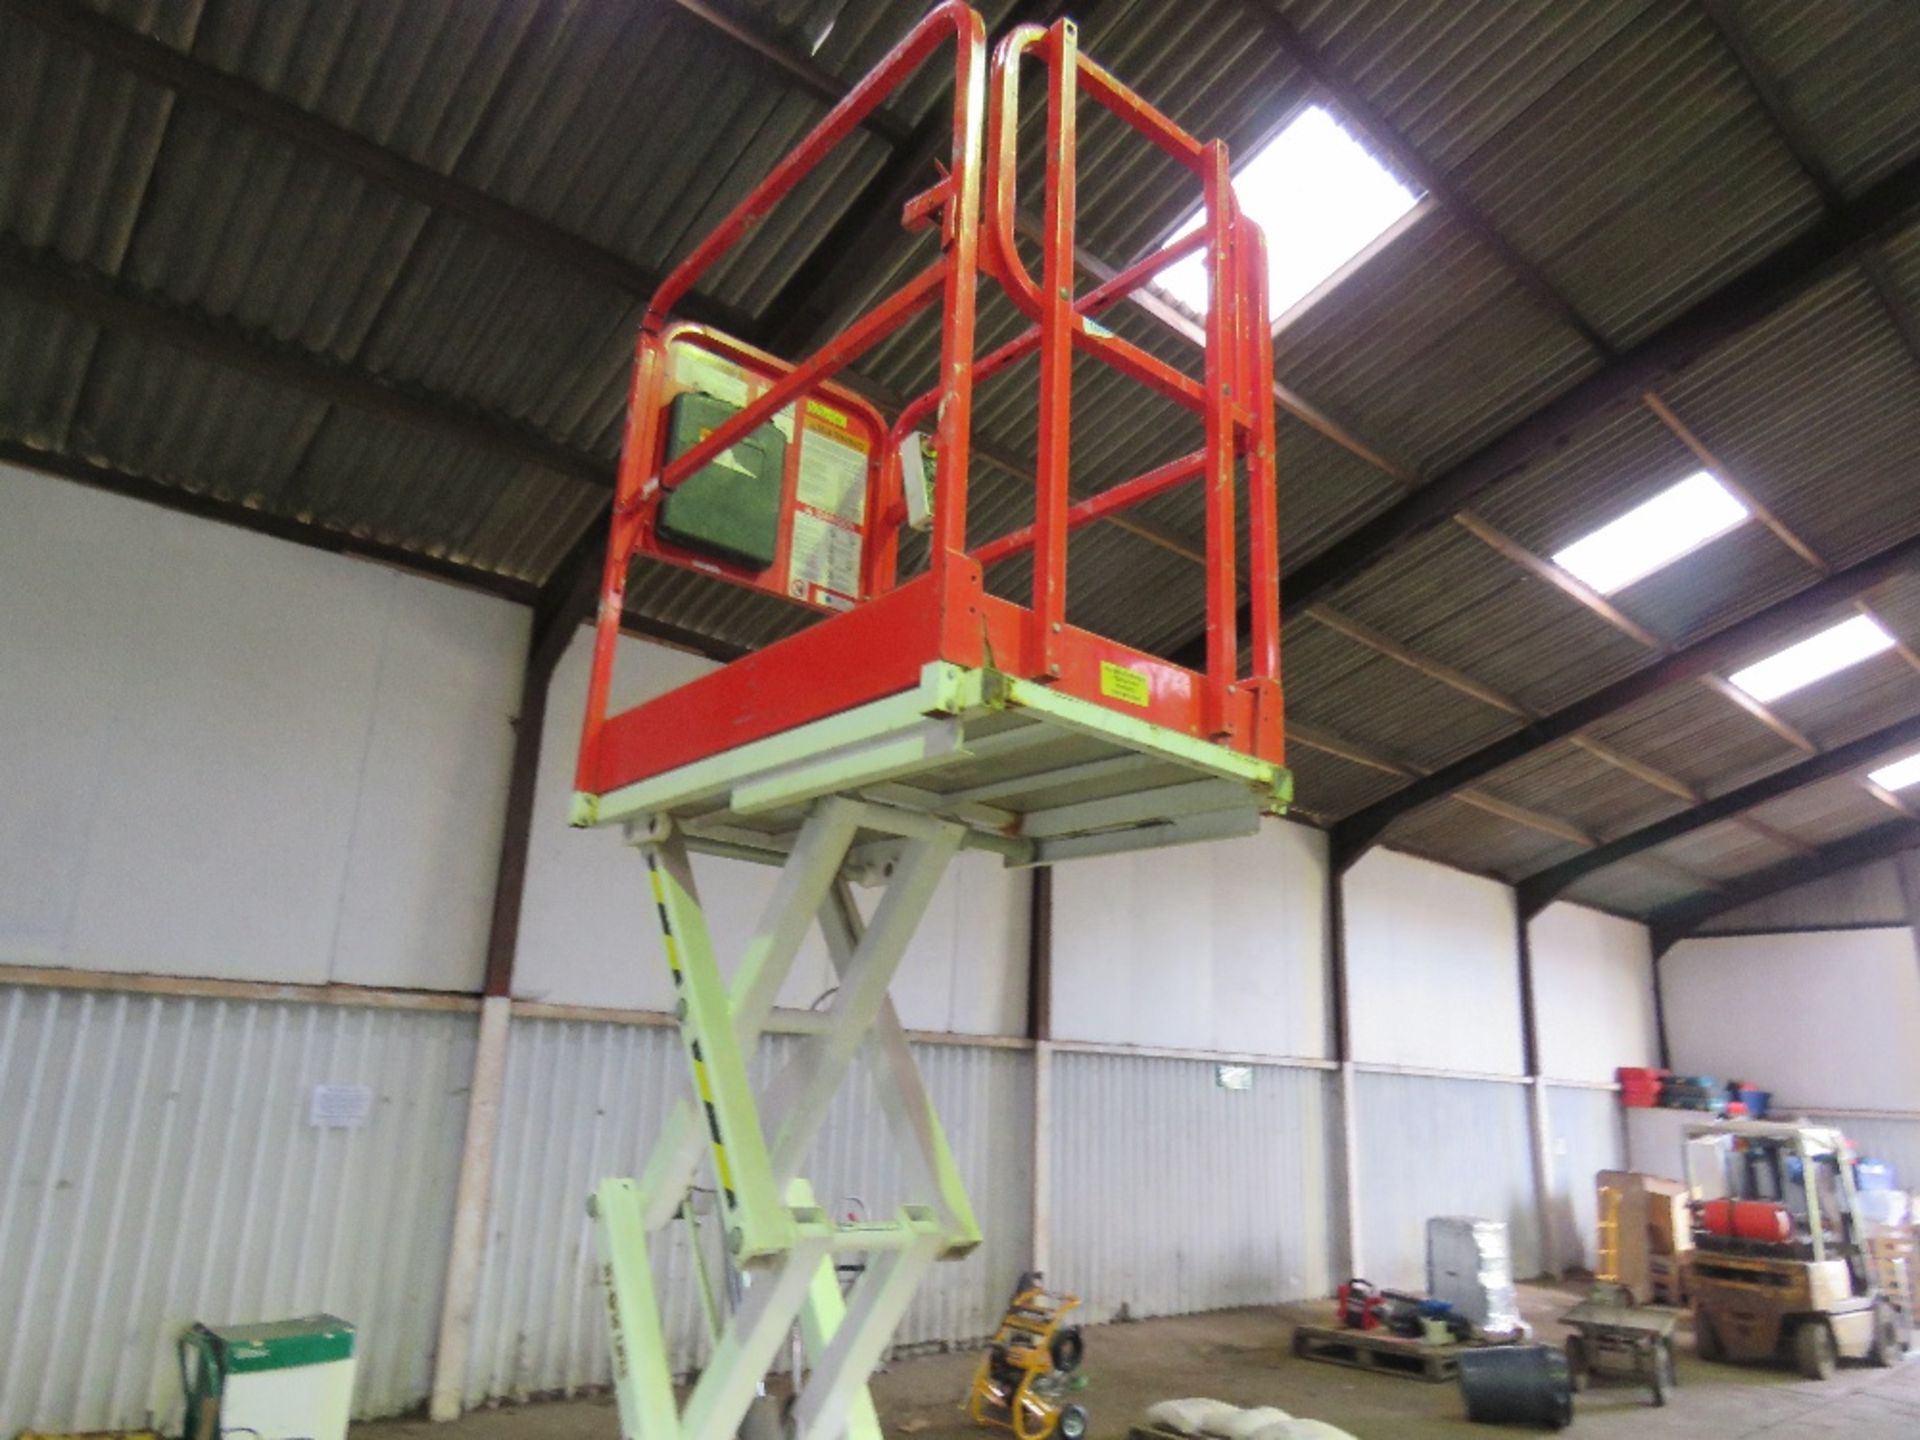 HYBRID HB830 SCISSOR LIFT ACCESS PLATFORM, 14FT MAX WORKING HEIGHT. SN:E0510228. WHEN TESTED WAS SEE - Image 3 of 4